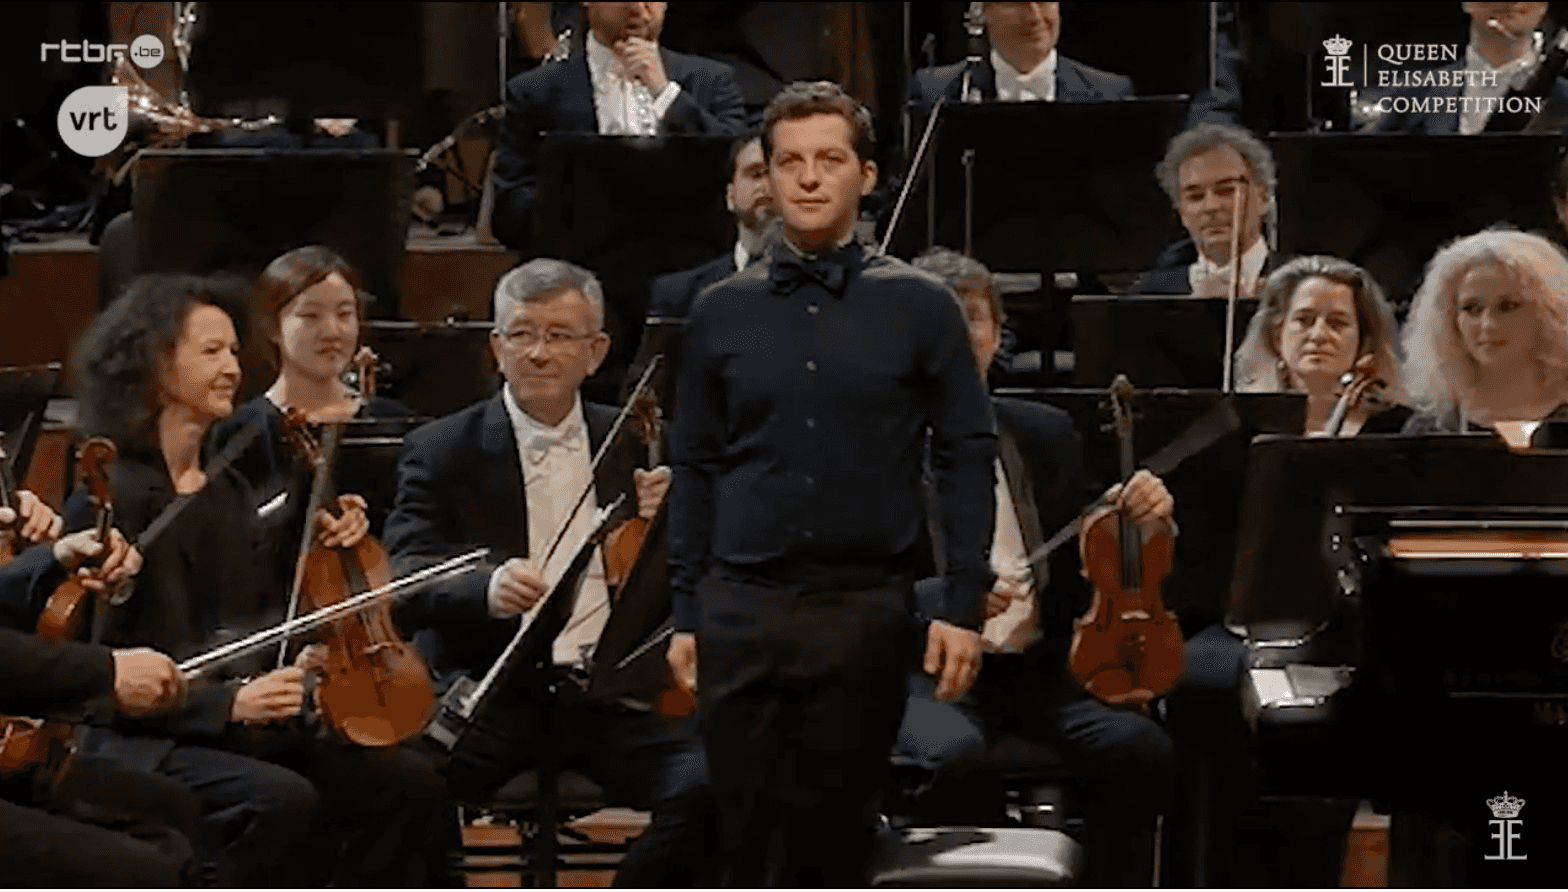 Henry standing in front of an orchestra